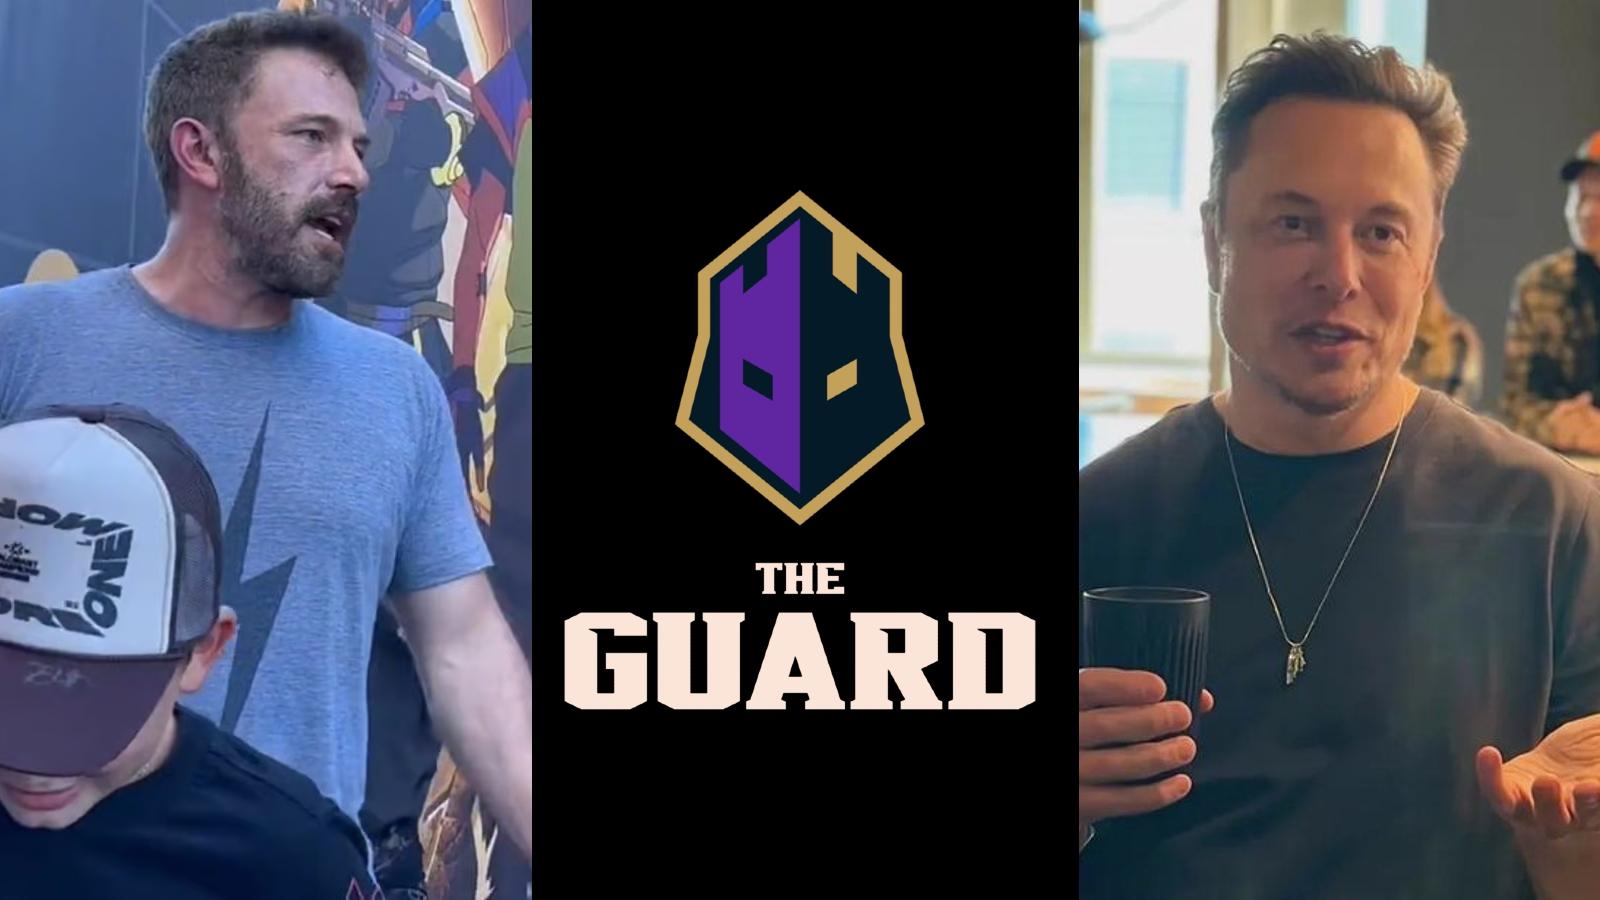 The Guard logo in the middle with Ben Affleck to the left and Elon Musk to the right